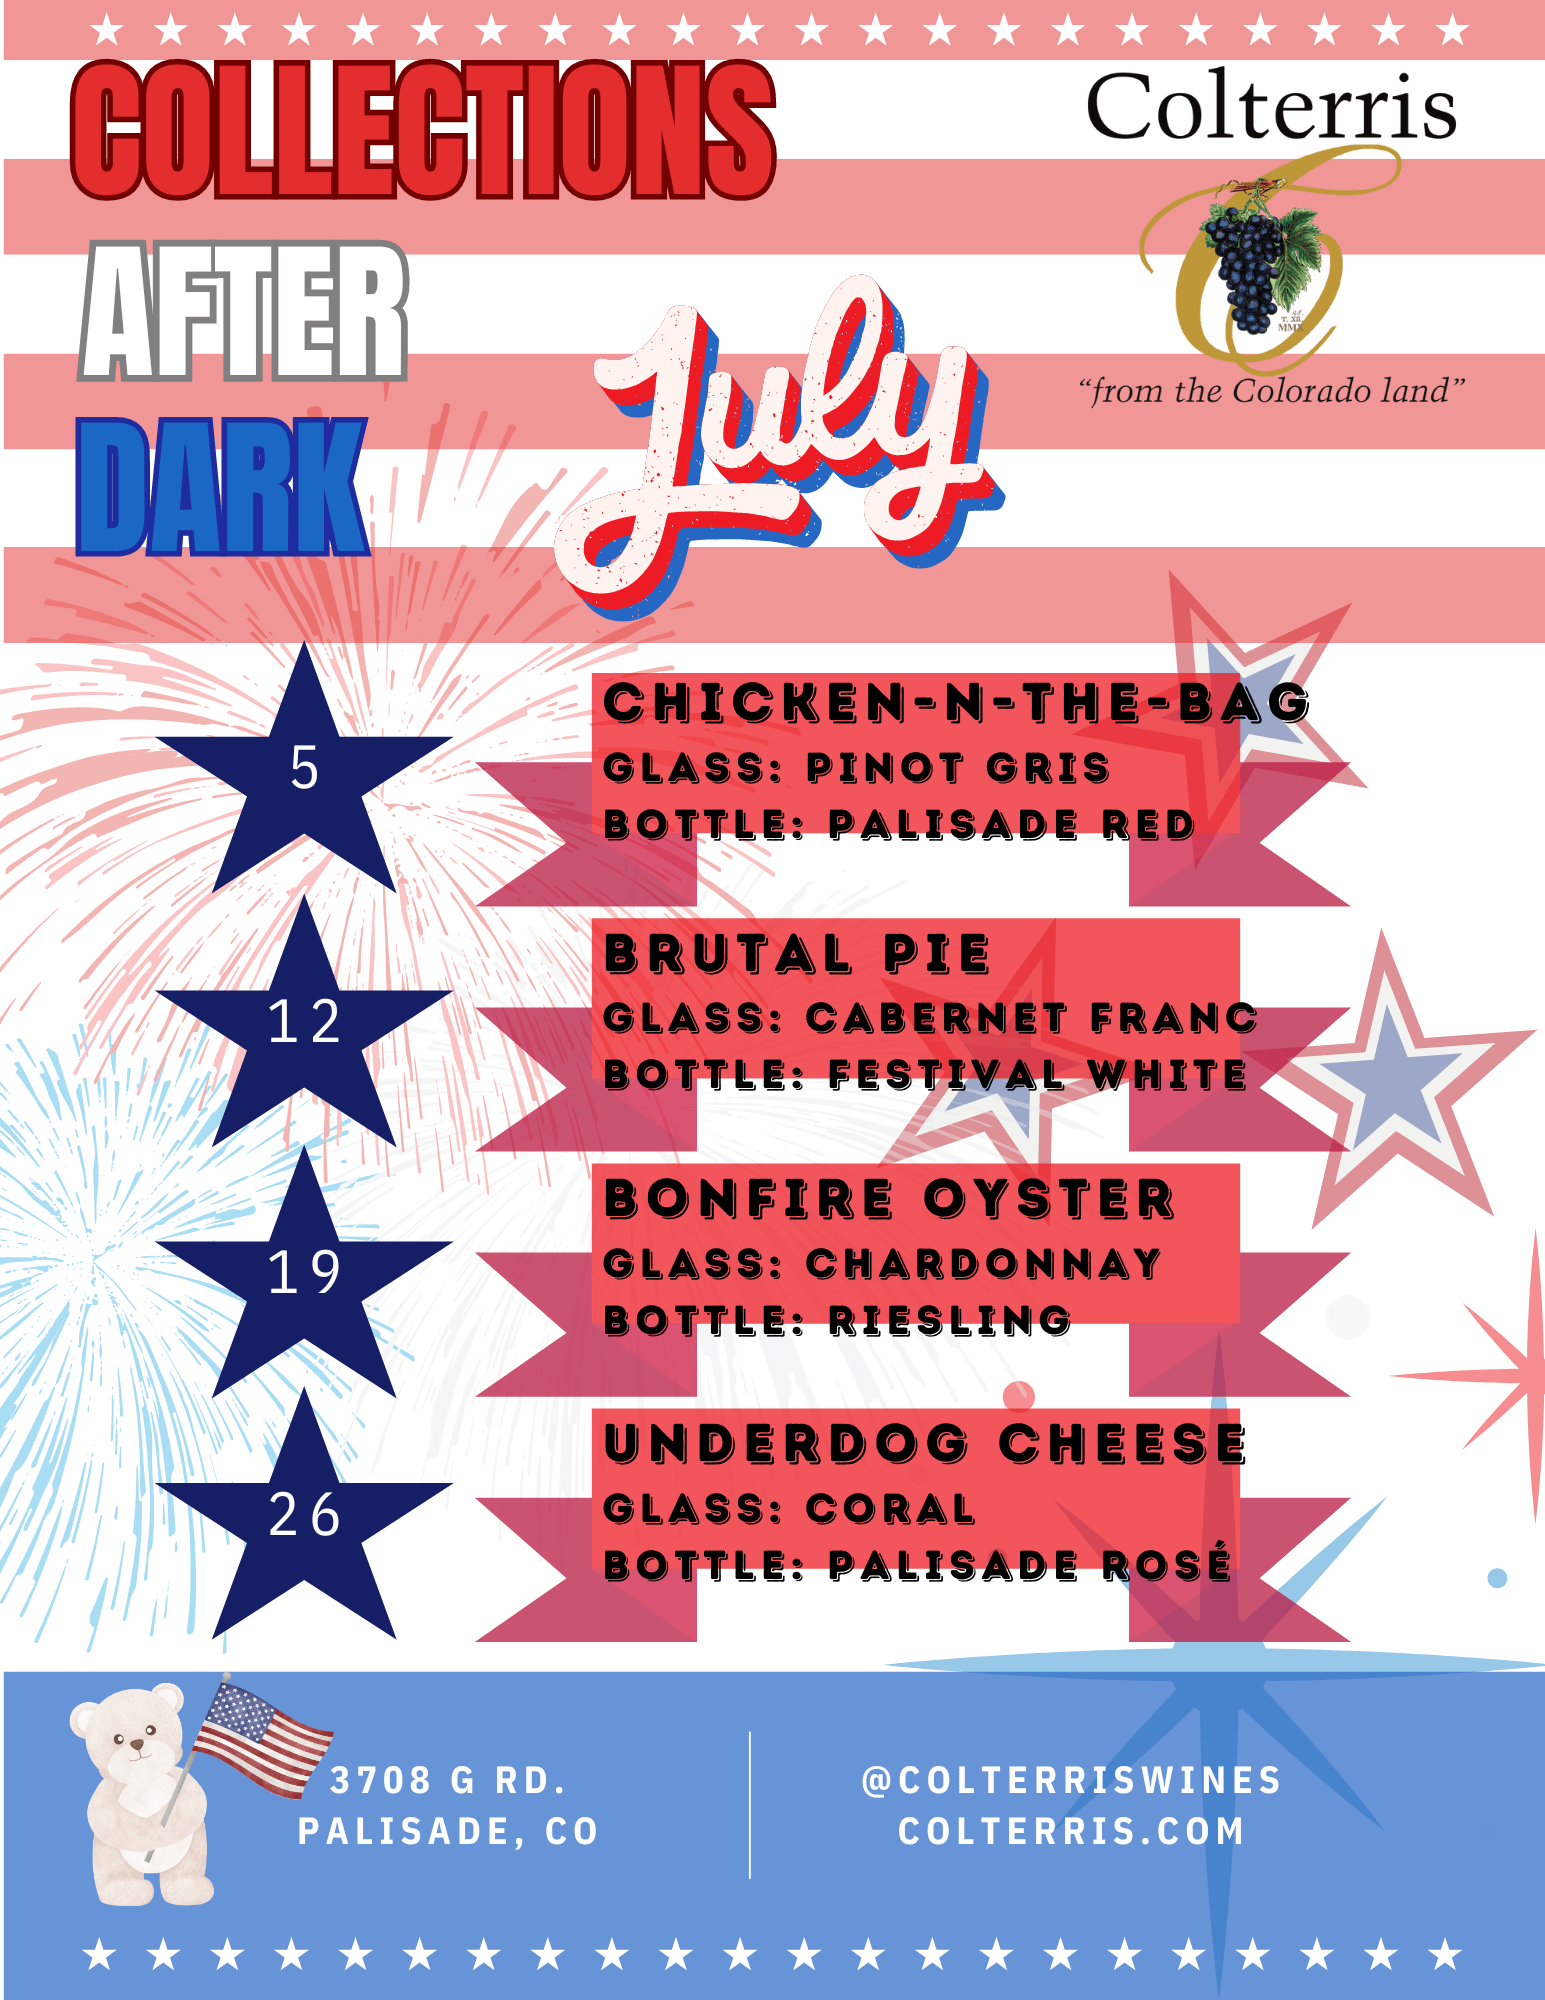 Colterris Collections After Dark July Food Truck Schedule.